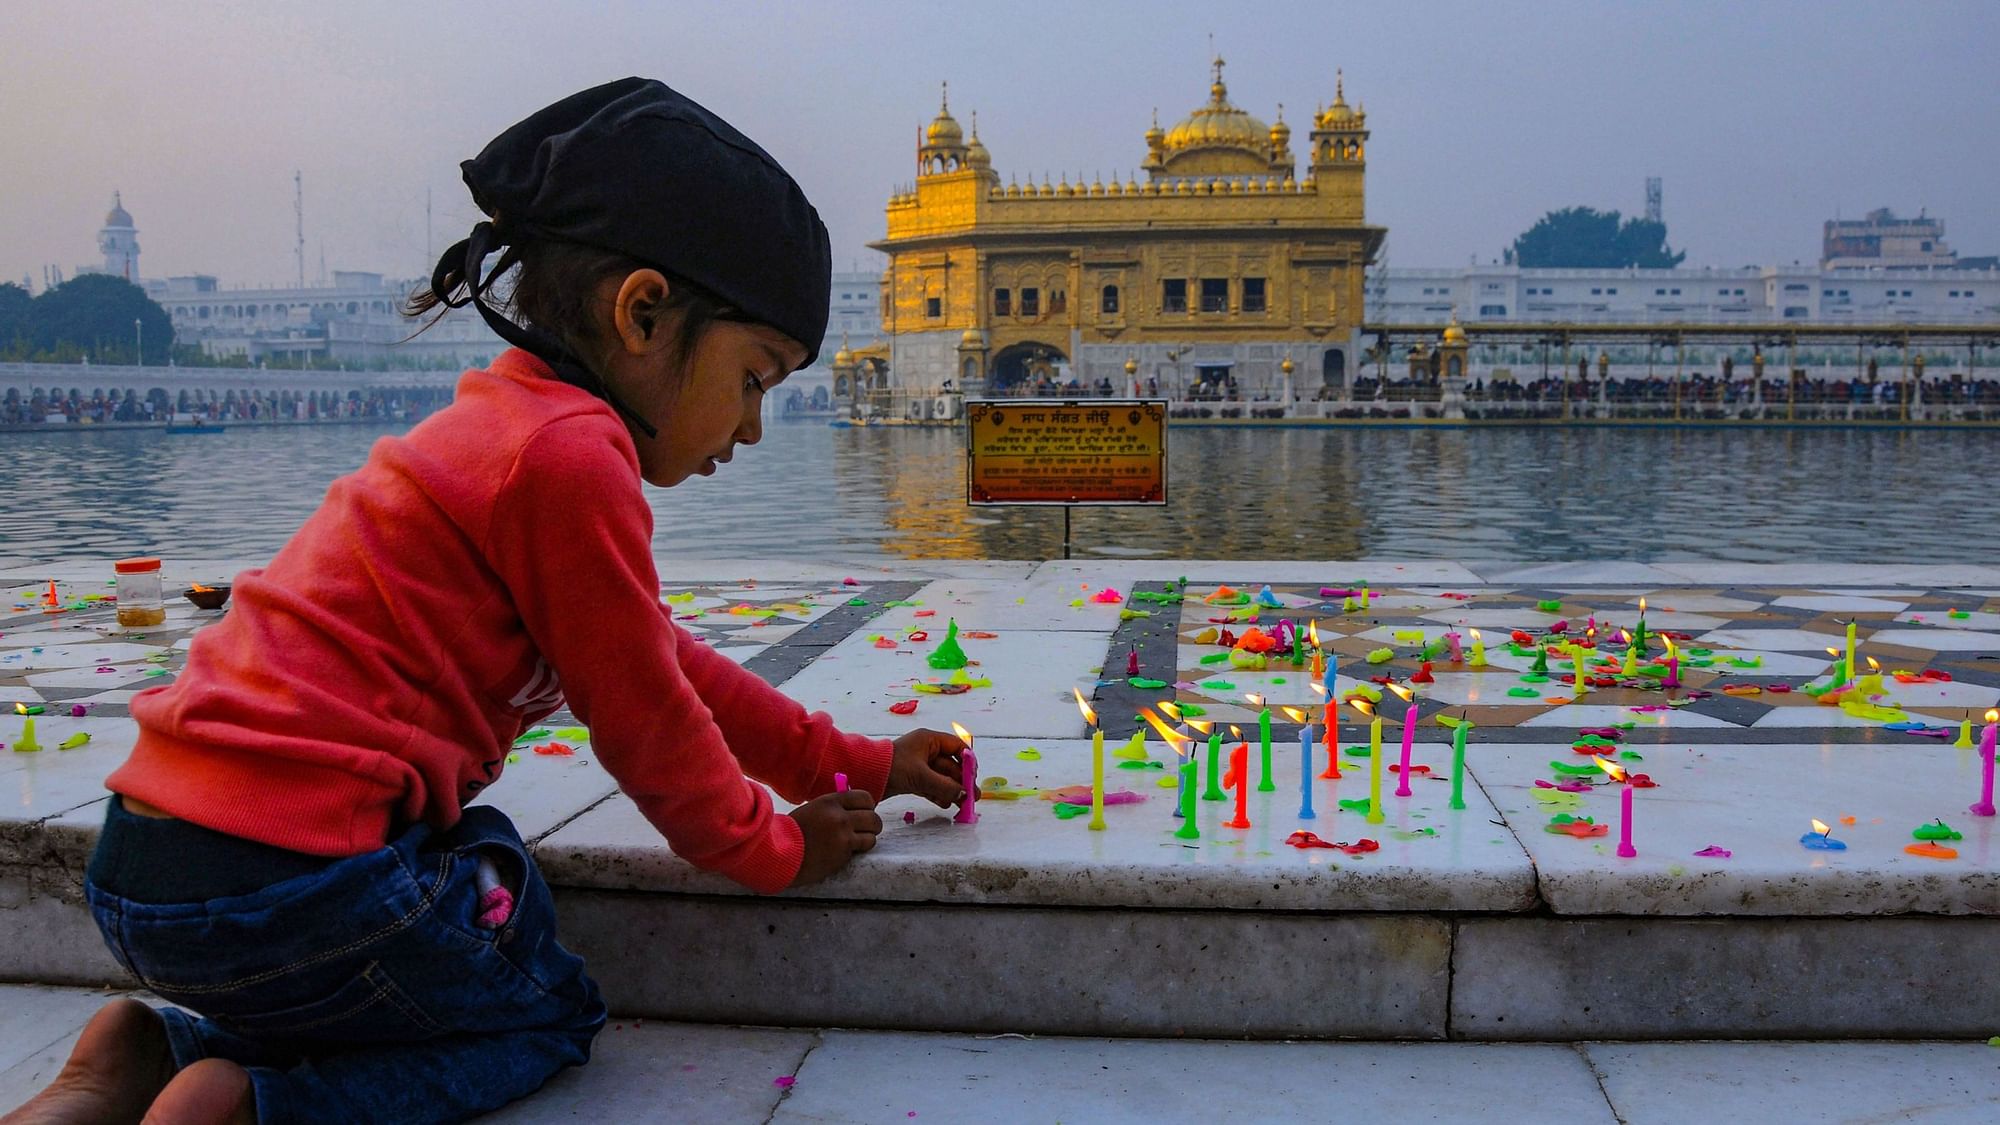 A young devotee lights a candle on the occasion of the 550th birth anniversary of Sikhism founder Guru Nanak Dev ji, in Amritsar.